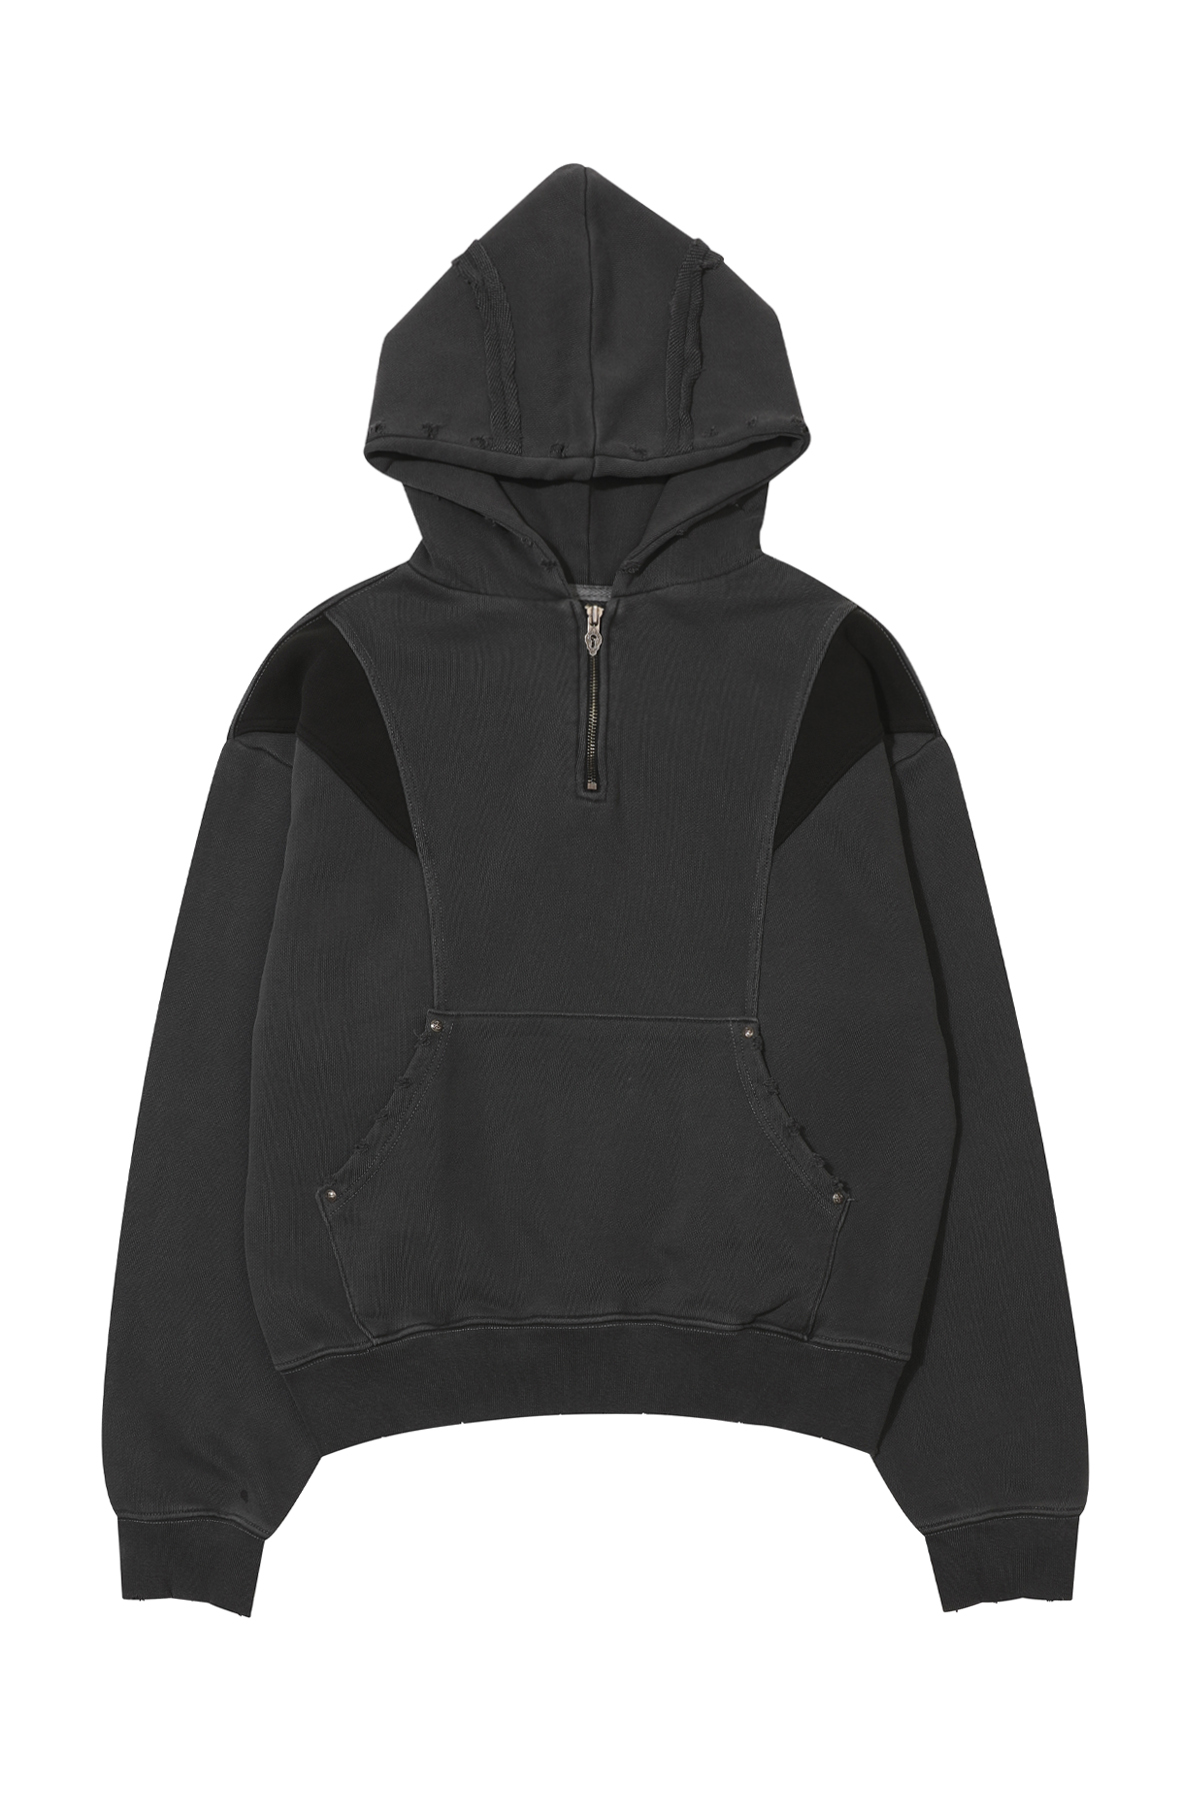 EMBROIDERED CUT-OFF HOODIE CHARCOAL